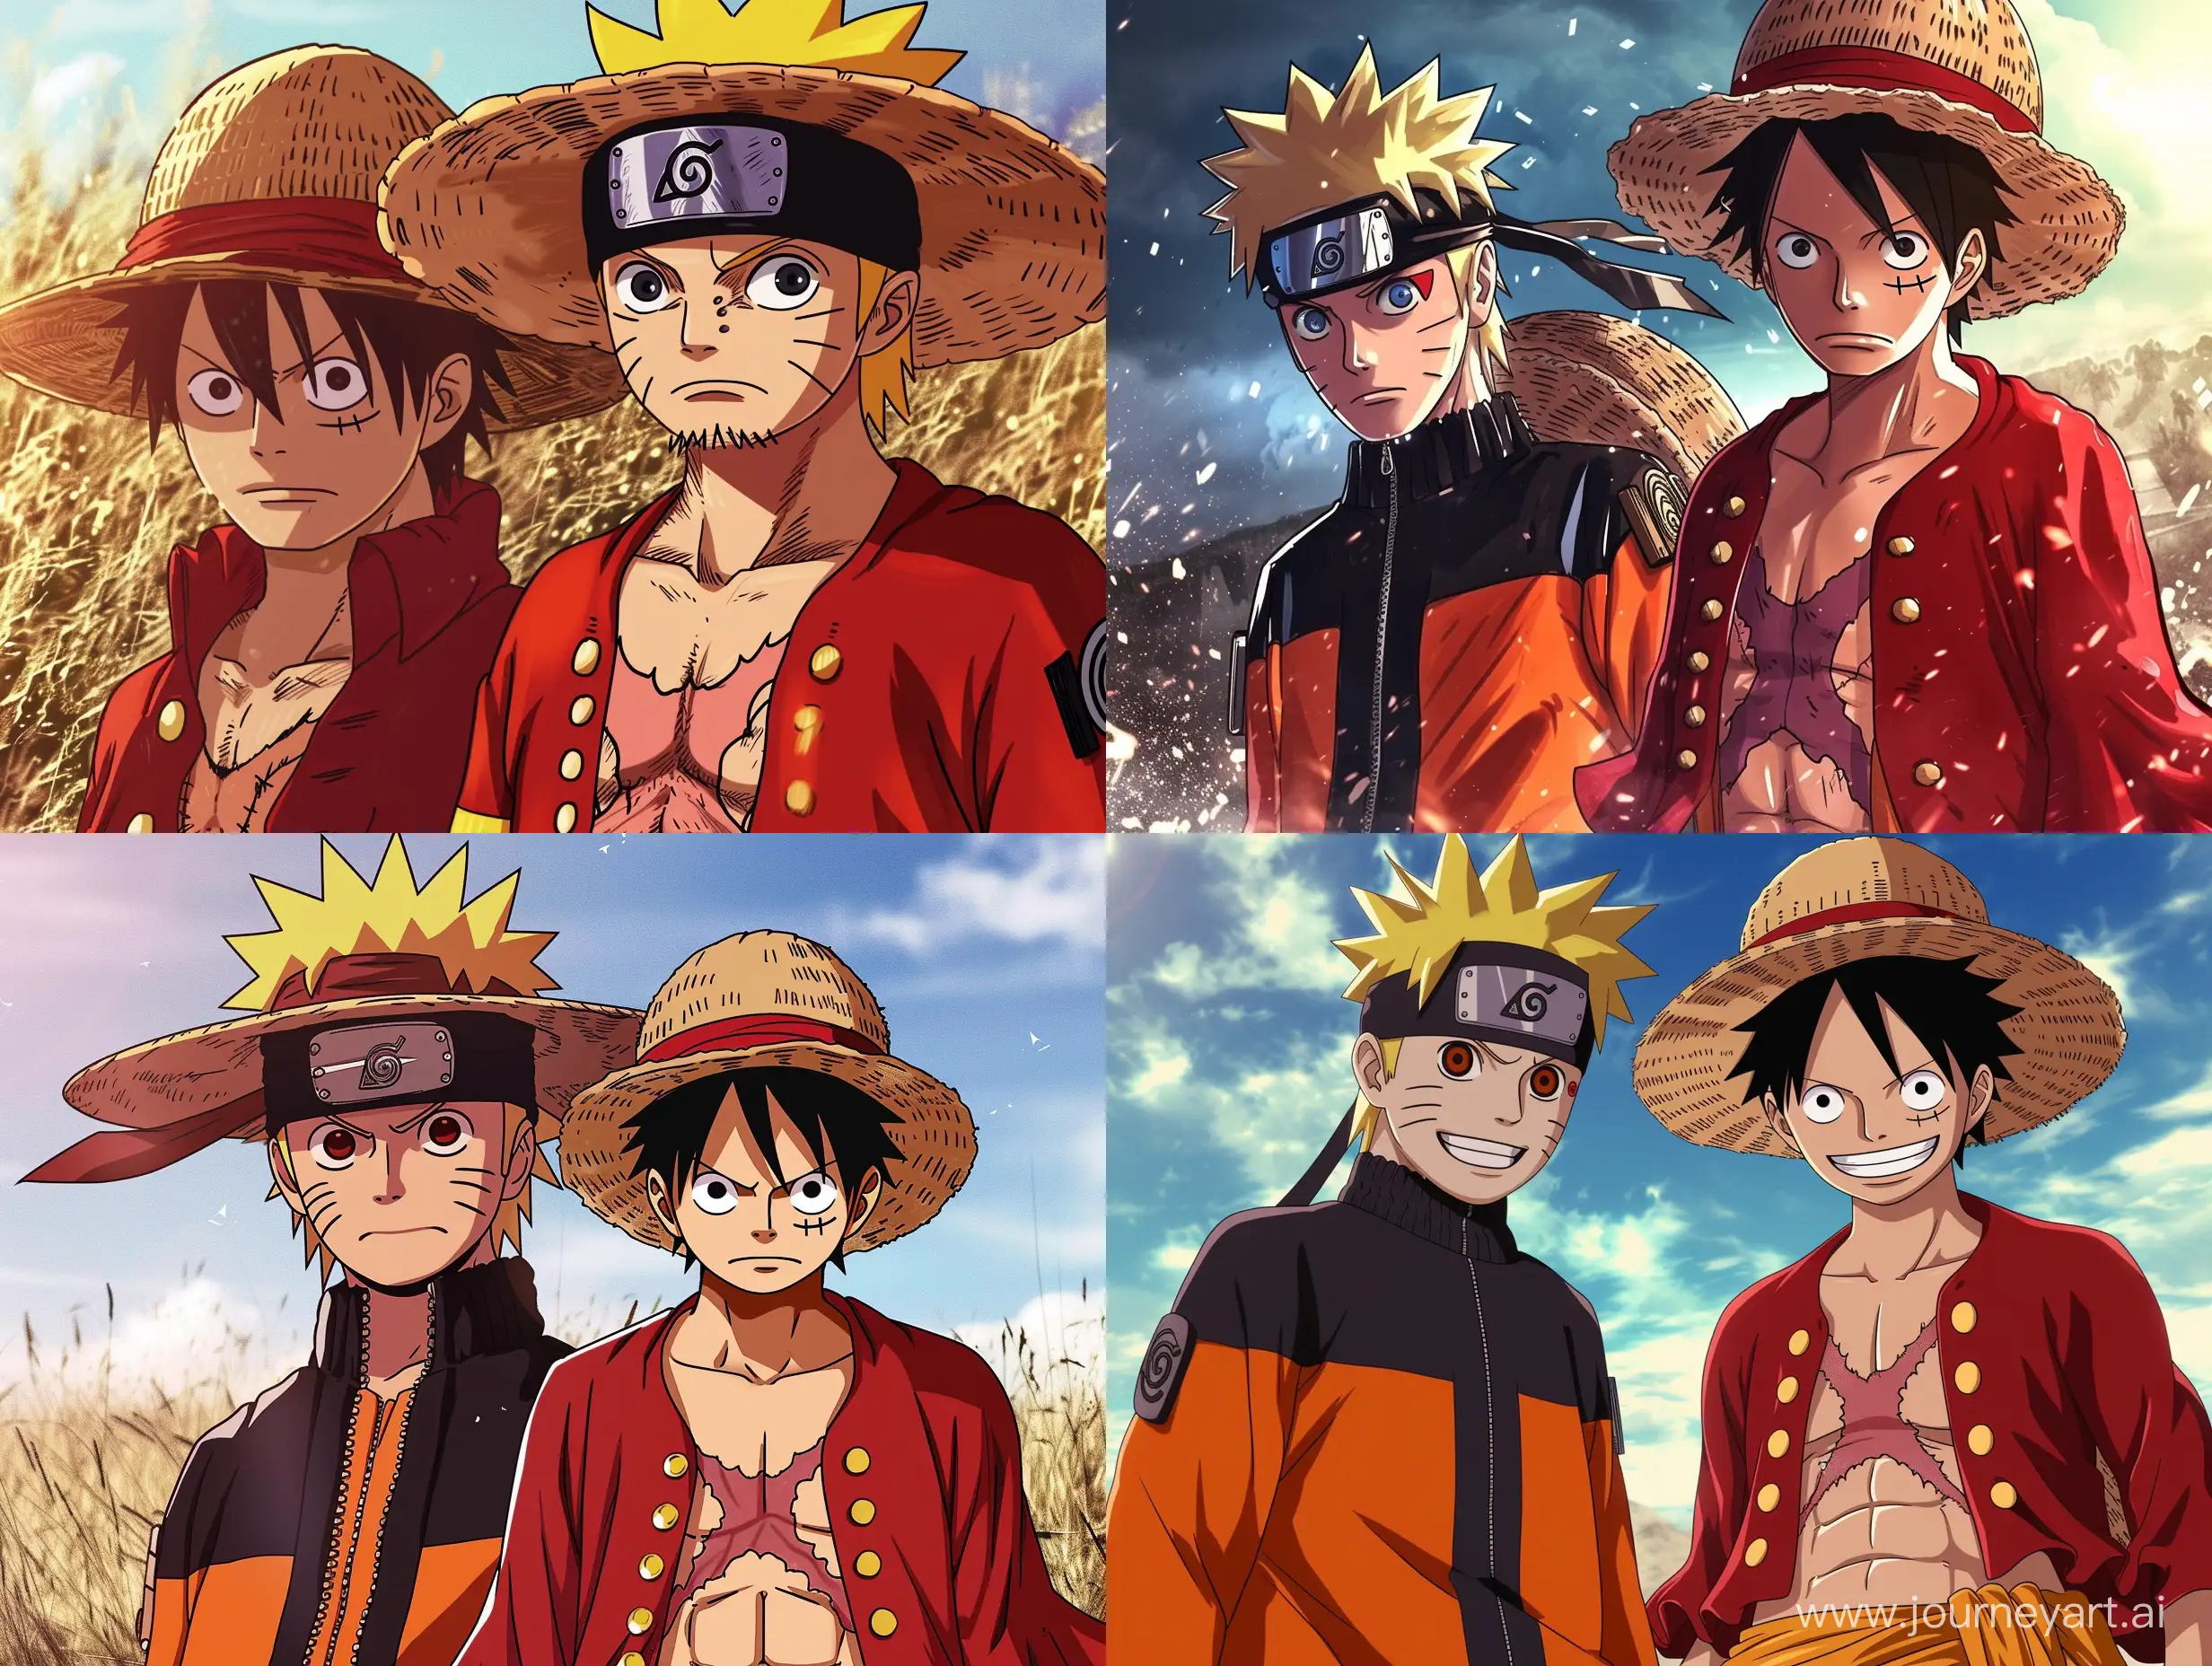 Epic-Fusion-of-Naruto-and-Monkey-D-Luffy-Adventure-Art